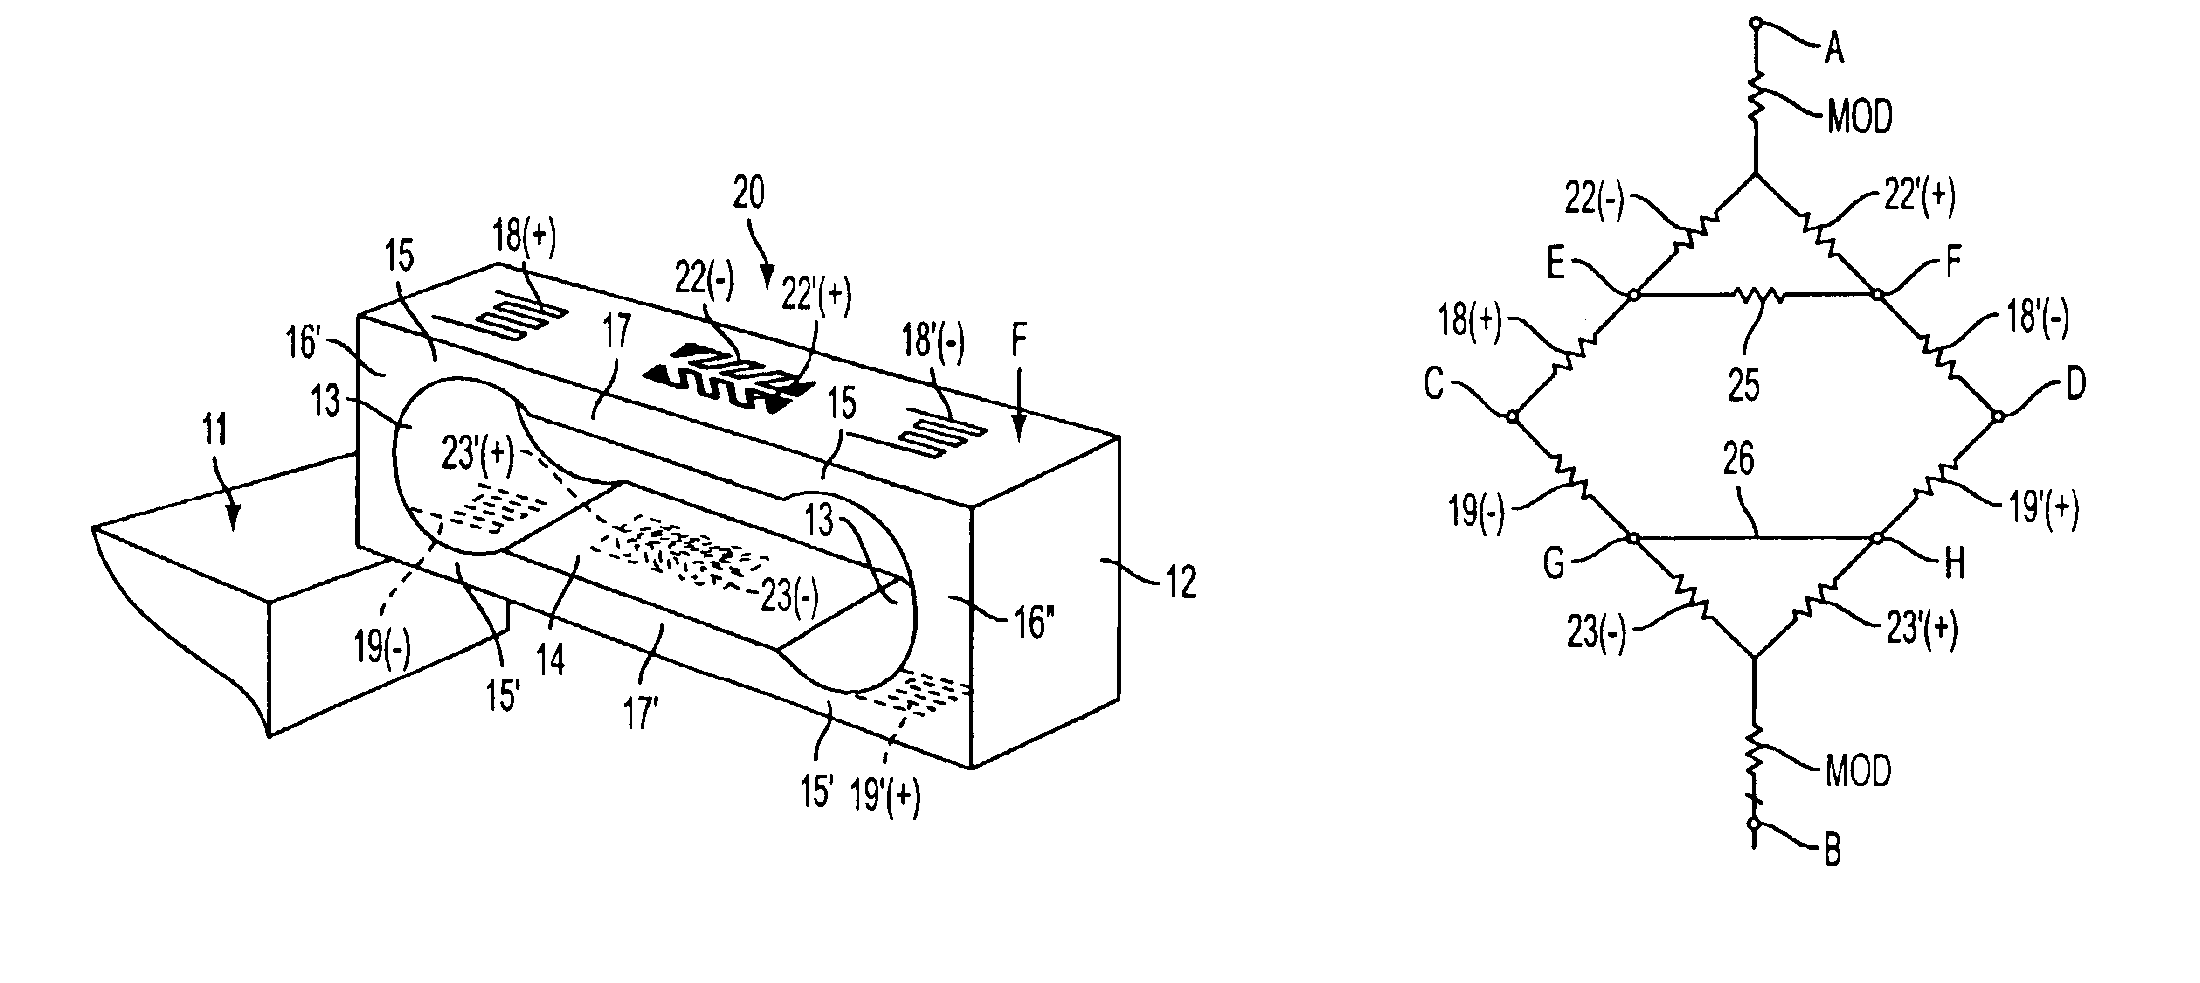 Bending beam load cell with torque sensitivity compensation